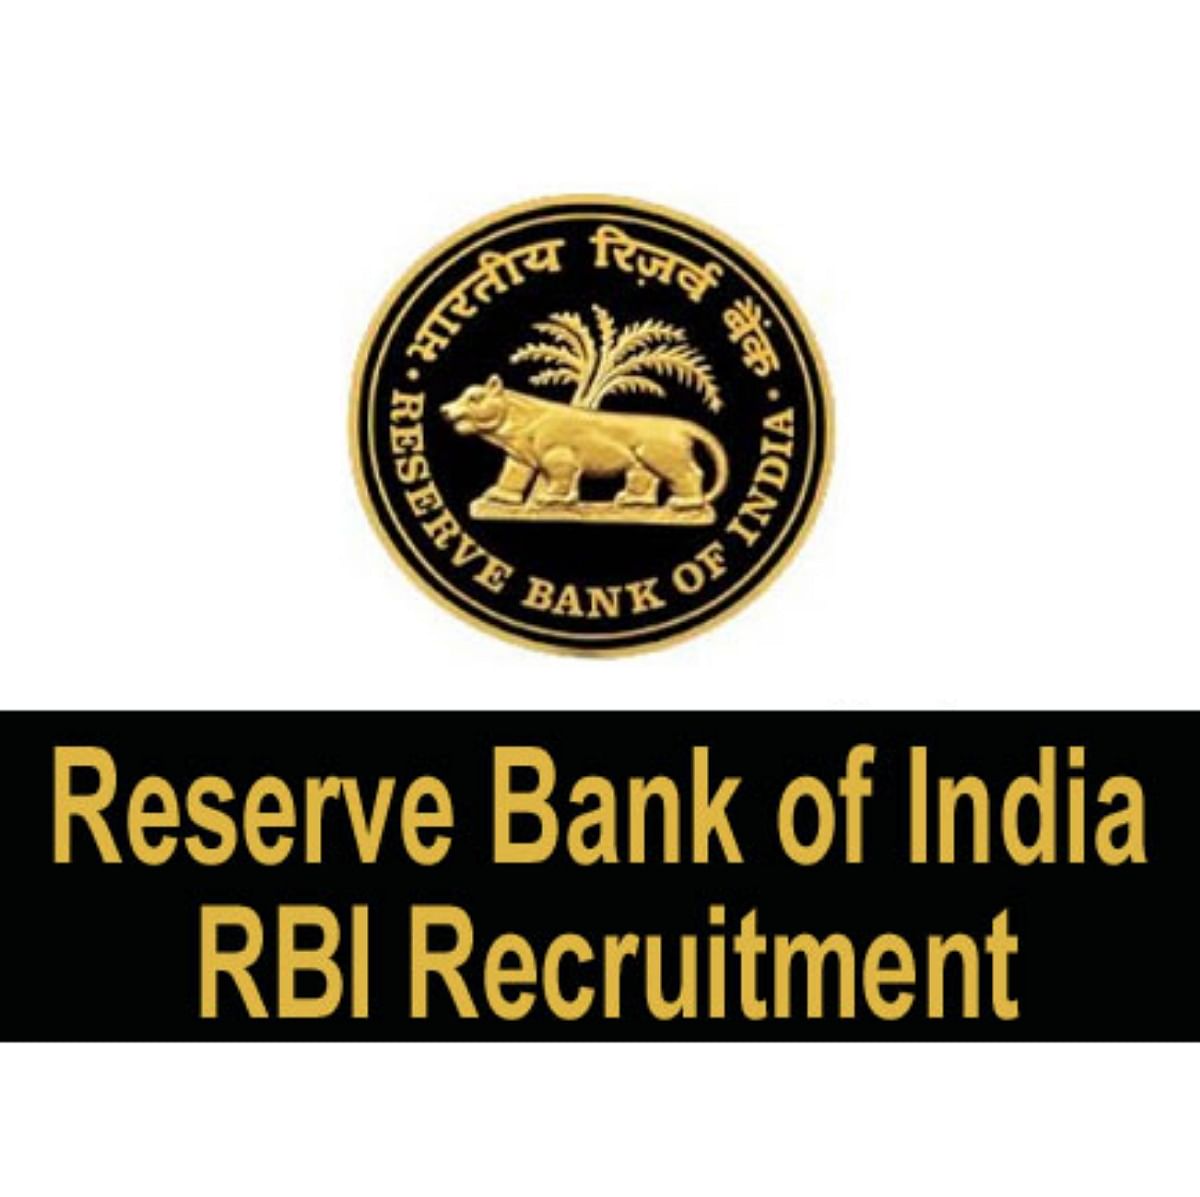 RBI Recruitment 2021: Govt Jobs for 29 Posts, Salary Offered More than 60 Thousand